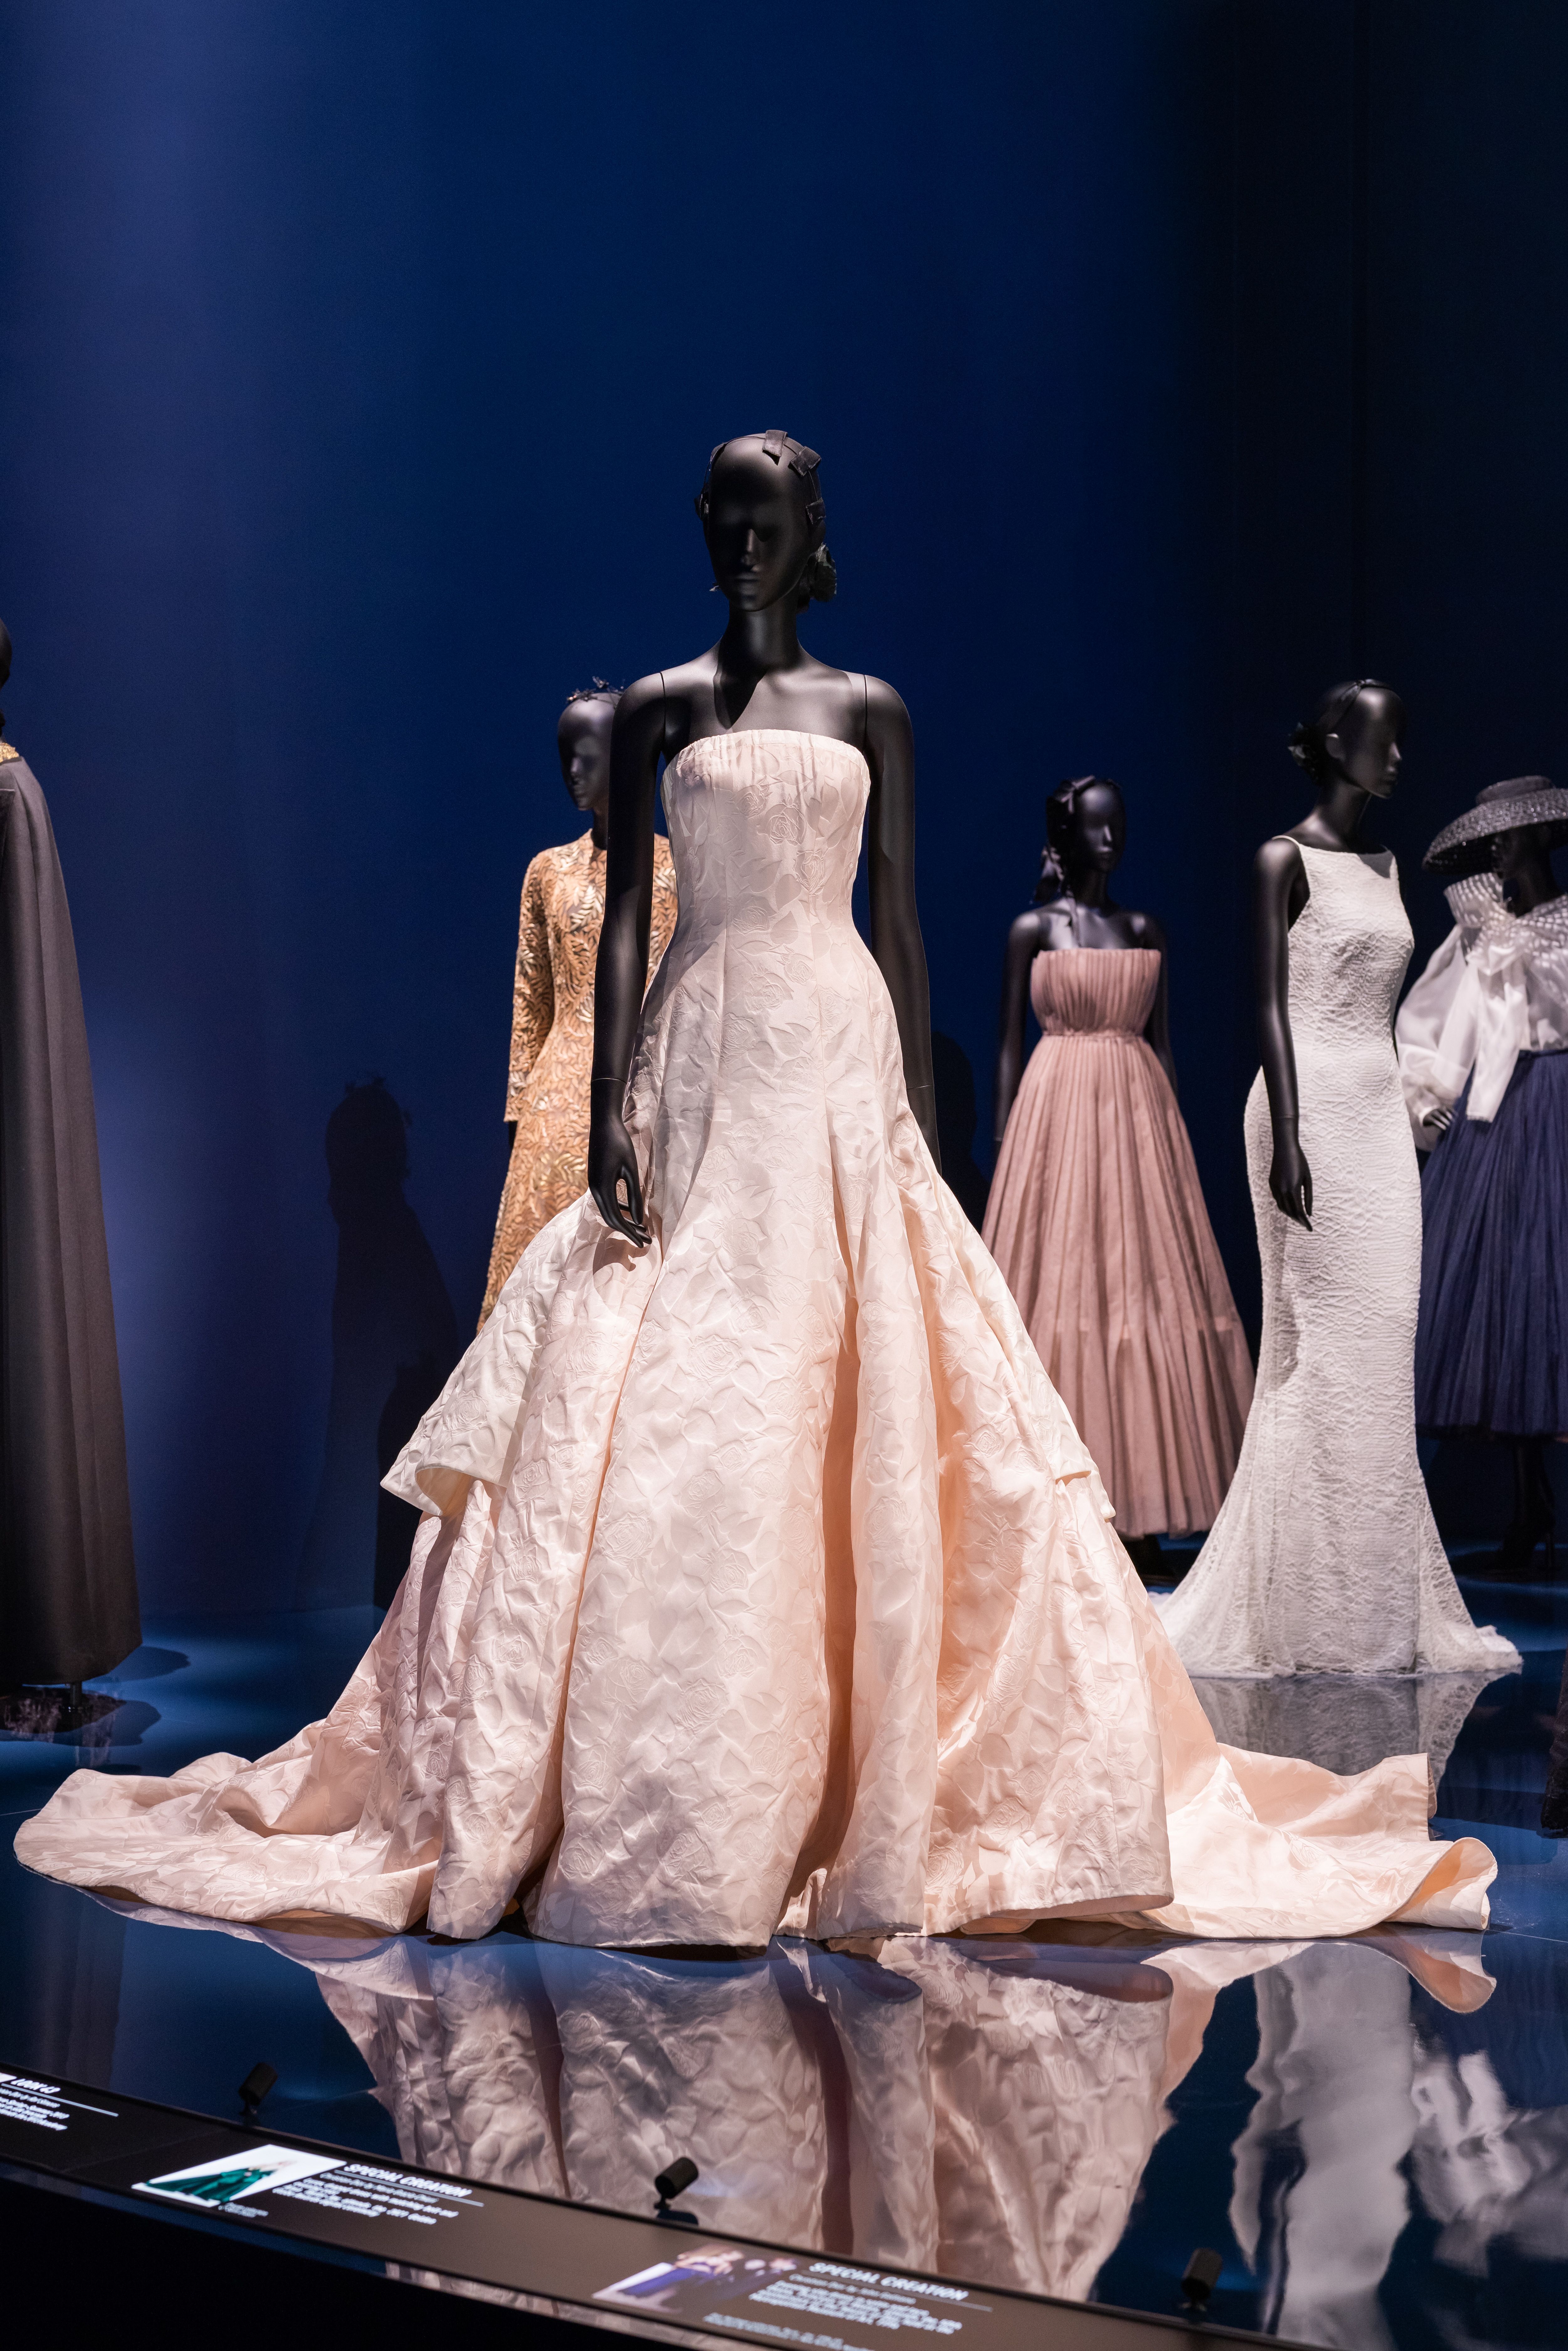 The Christian Dior Designer Of Dreams Exhibit Opens at the Brooklyn Museum